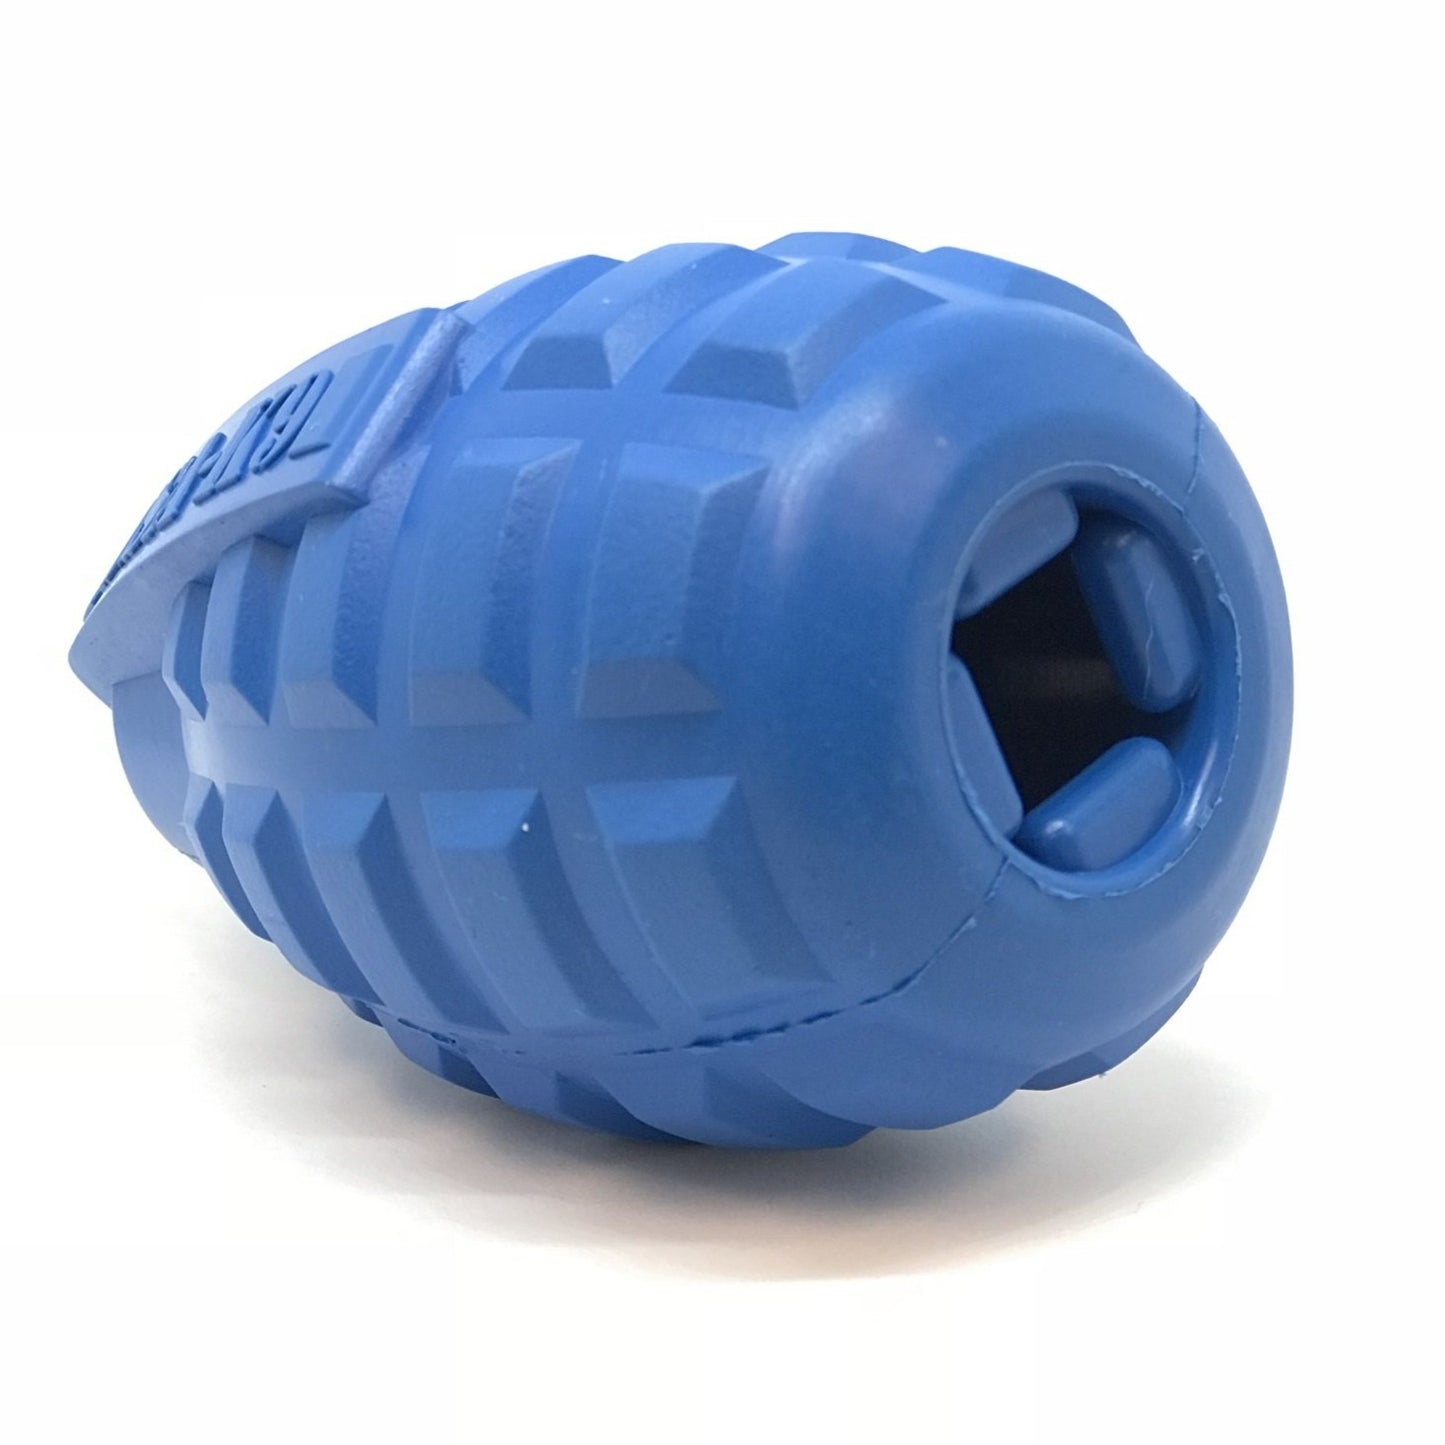 USA K9 Grenade Durable Chew Toy and Treat Dispenser - Kit4dogs